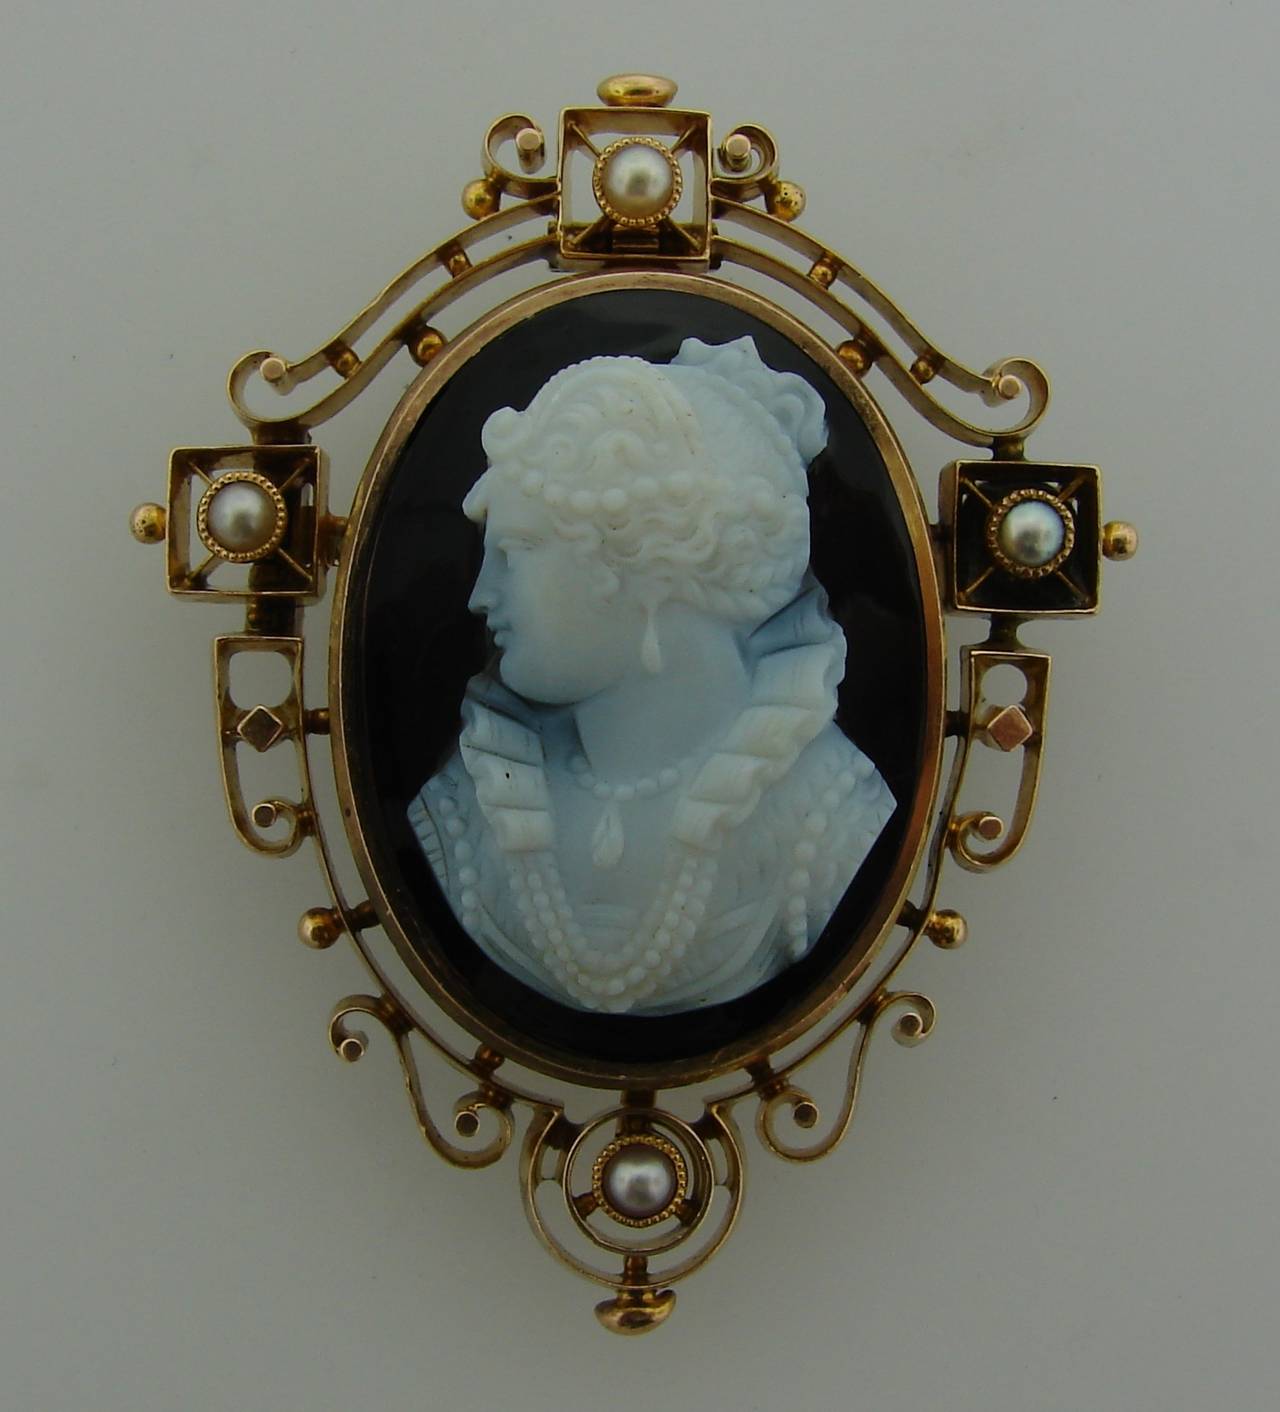 Lovely Victorian cameo pin/pendant with beautiful woman bust carved on agate. The cameo is framed in 14k (tested) yellow gold and accented with four pearls.
The cameo measures 1-1/8